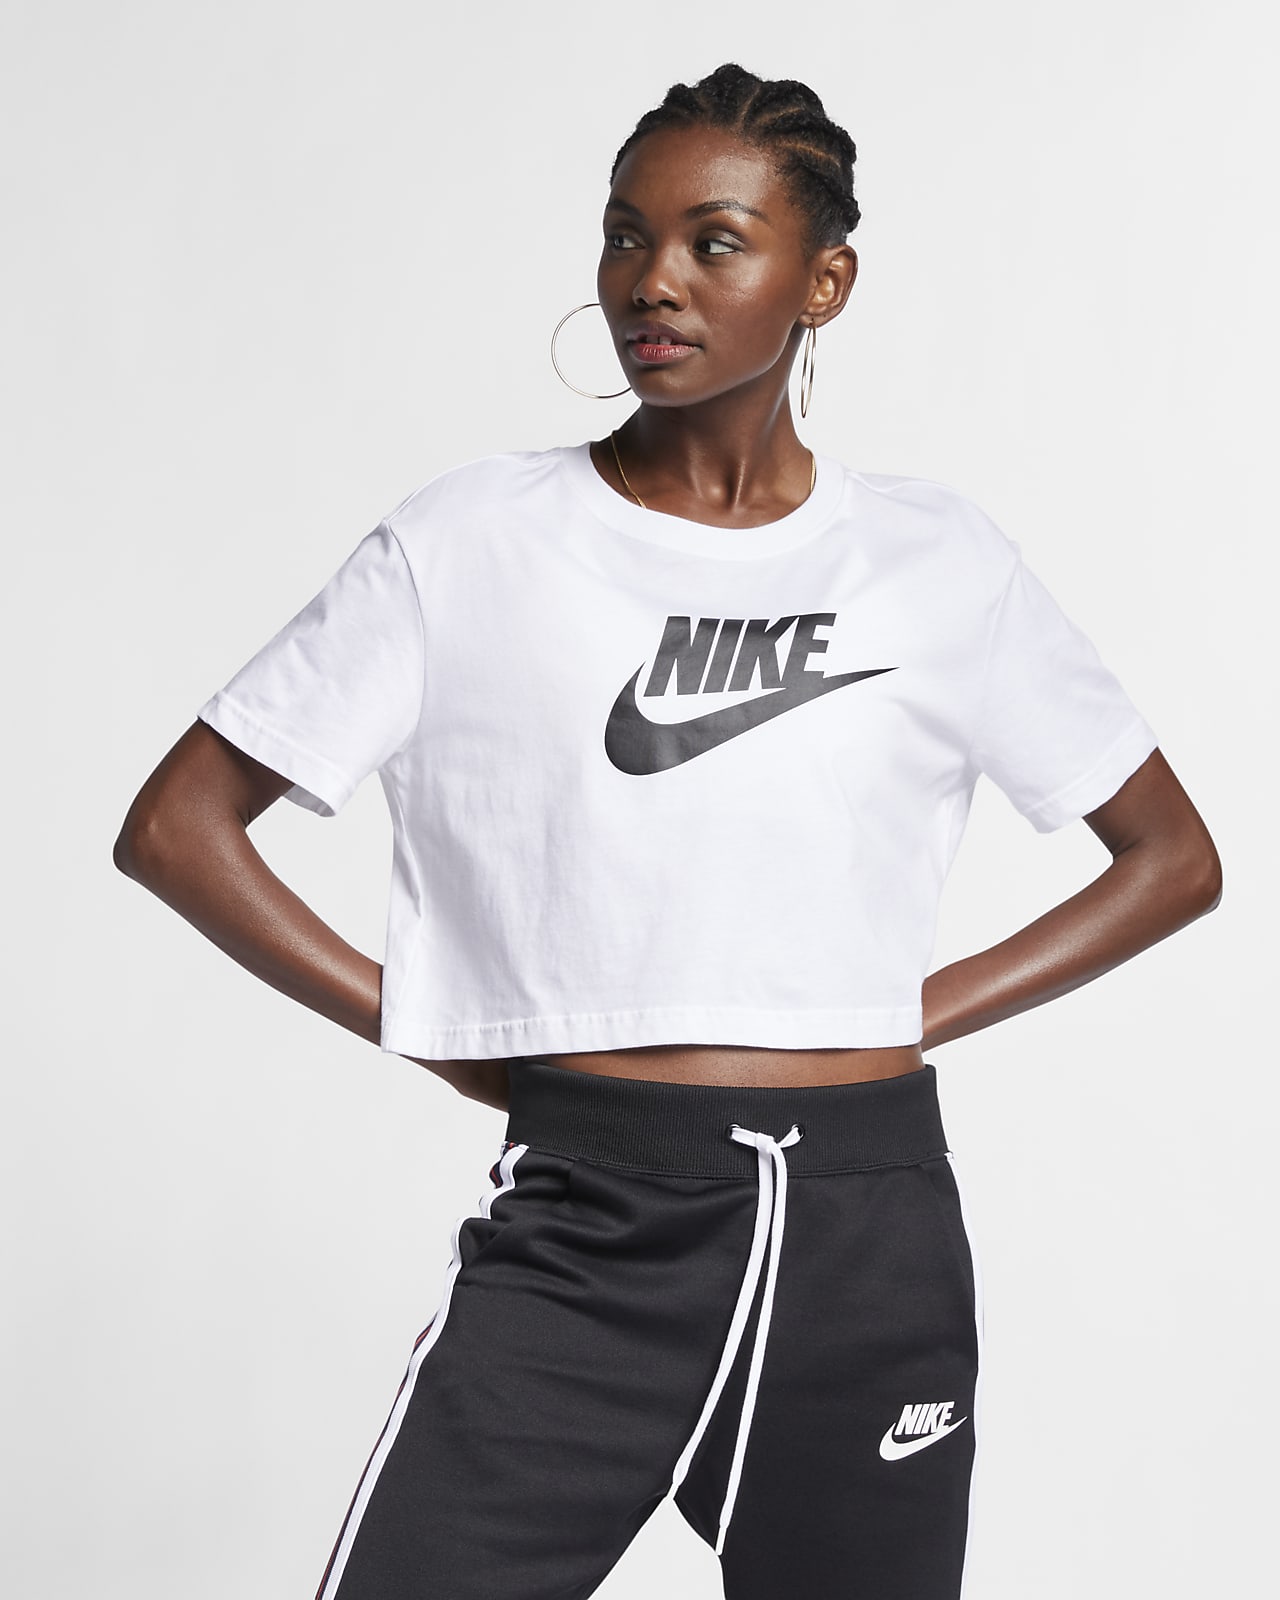 womens cropped football jersey